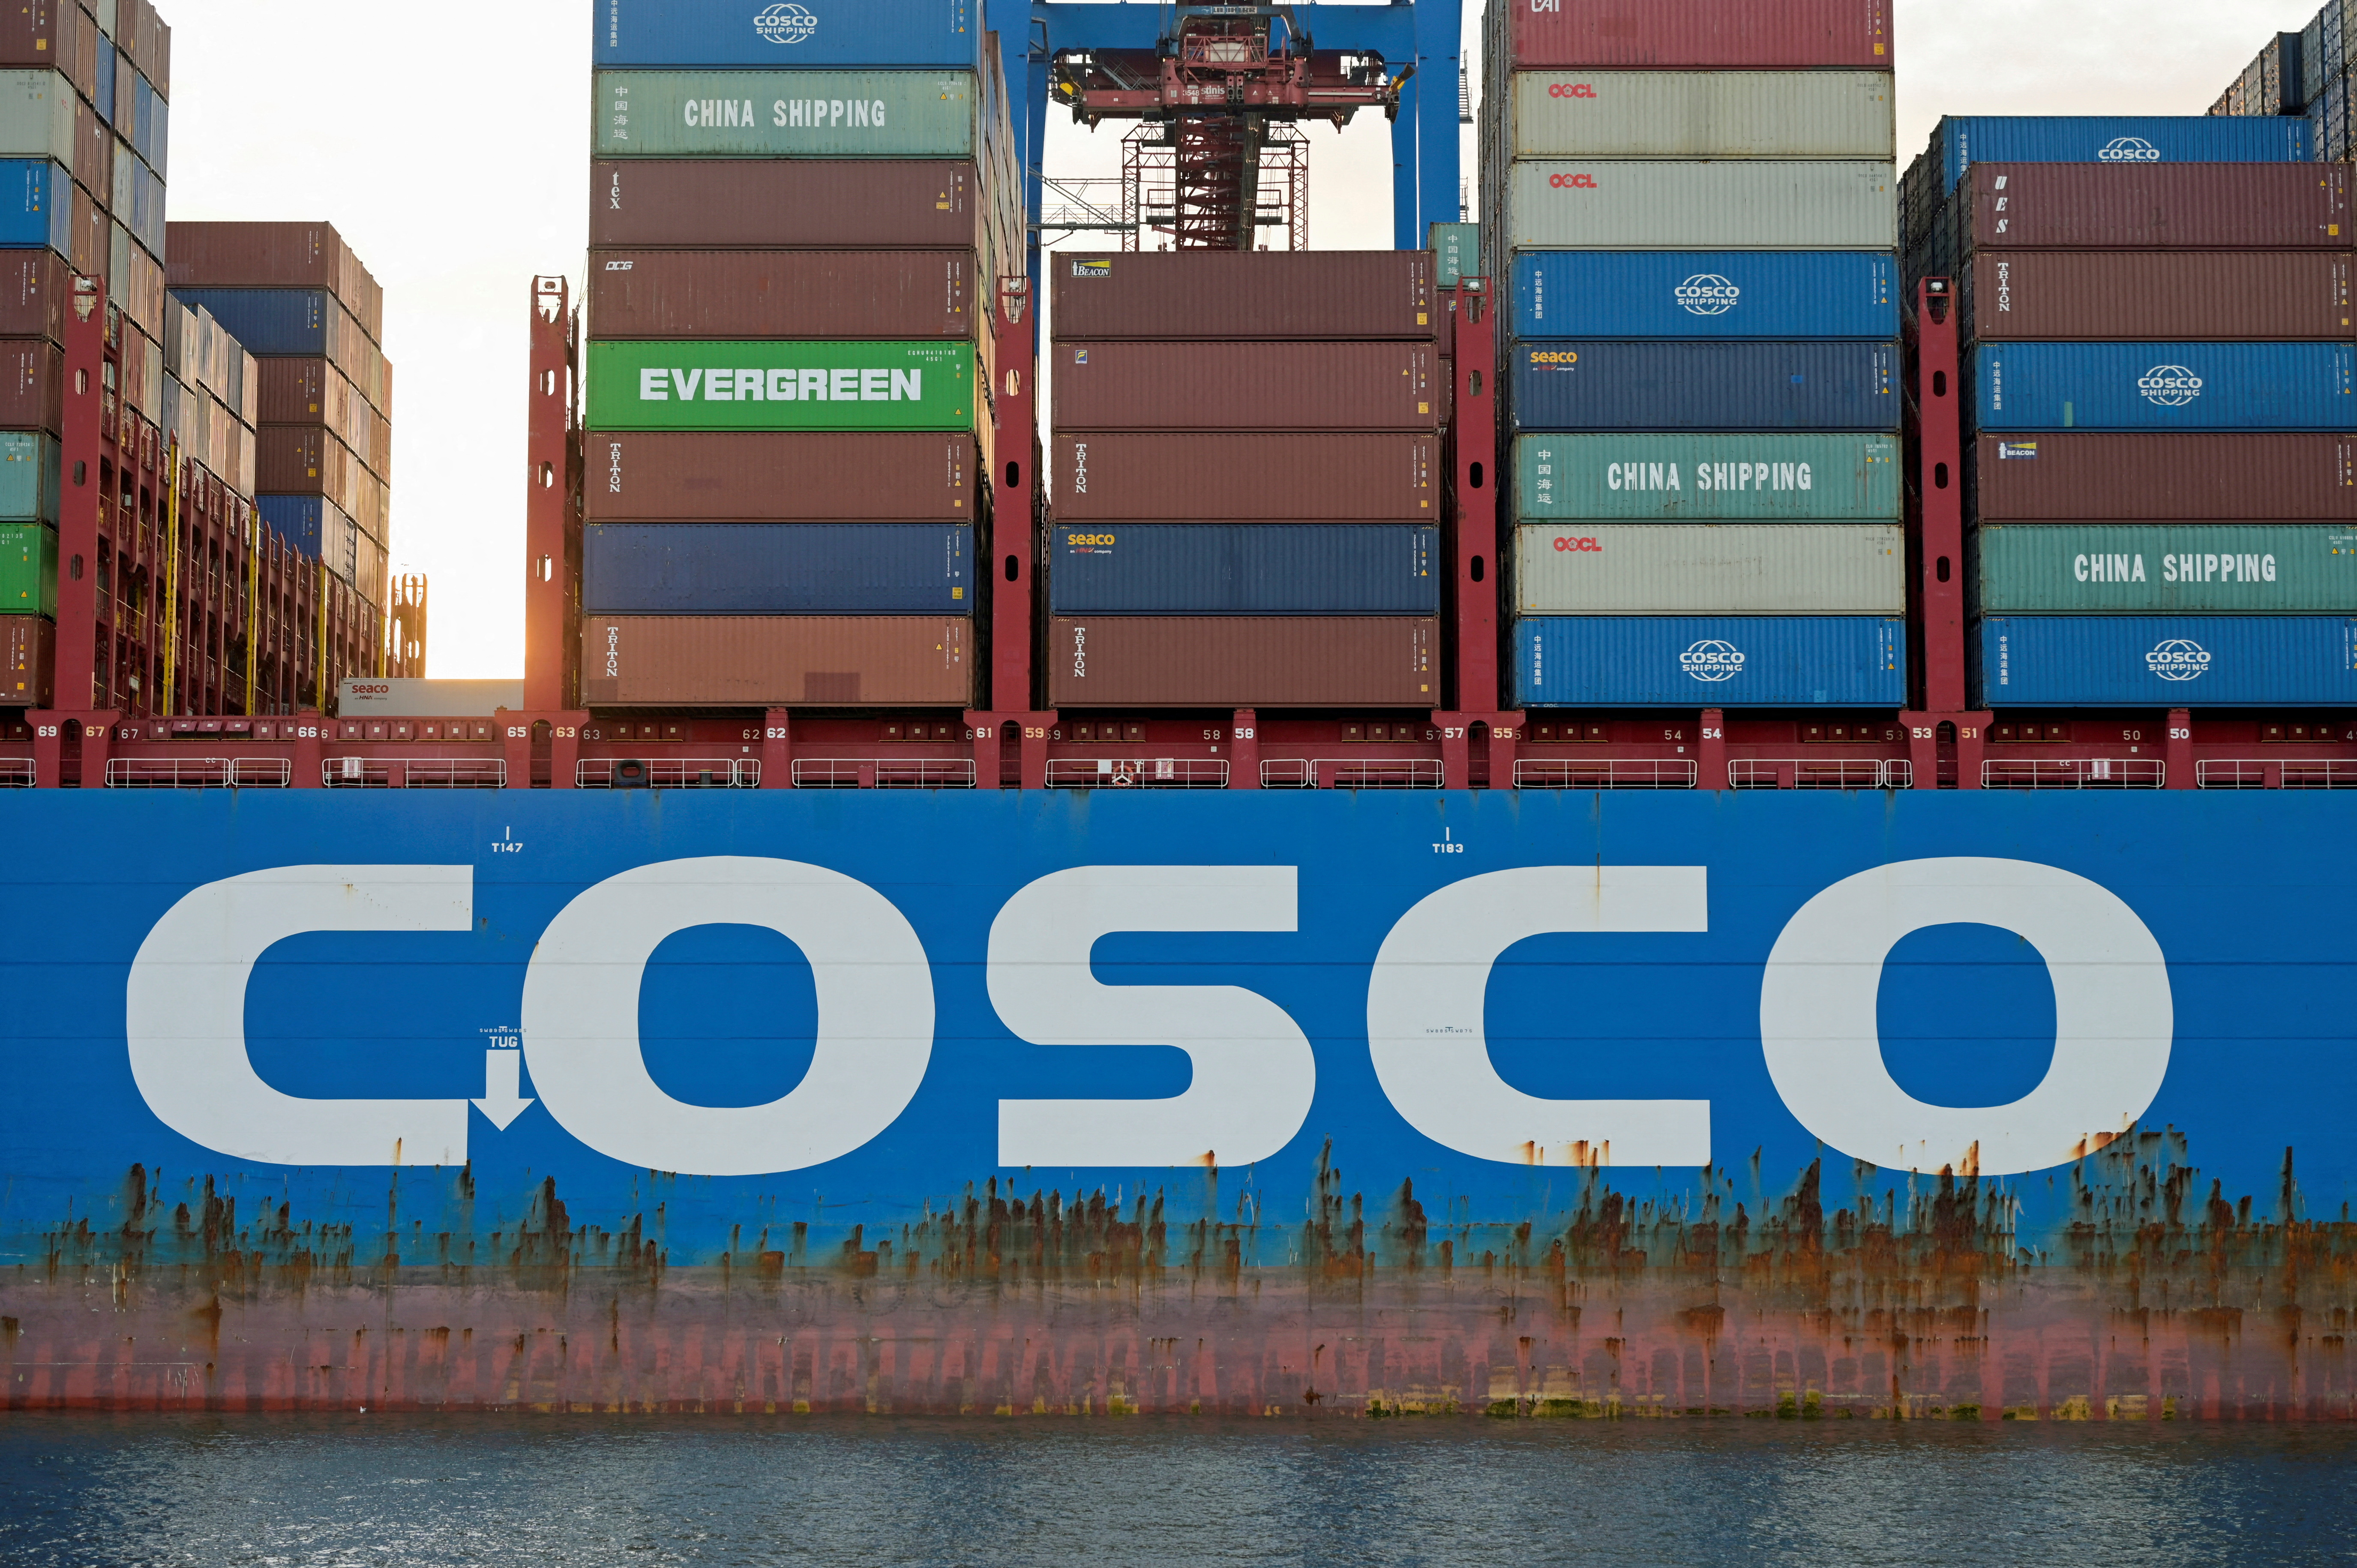 Cargo ship 'Cosco Shipping Gemini' of Chinese shipping company Cosco is loaded at the container terminal 'Tollerort' in the port in Hamburg